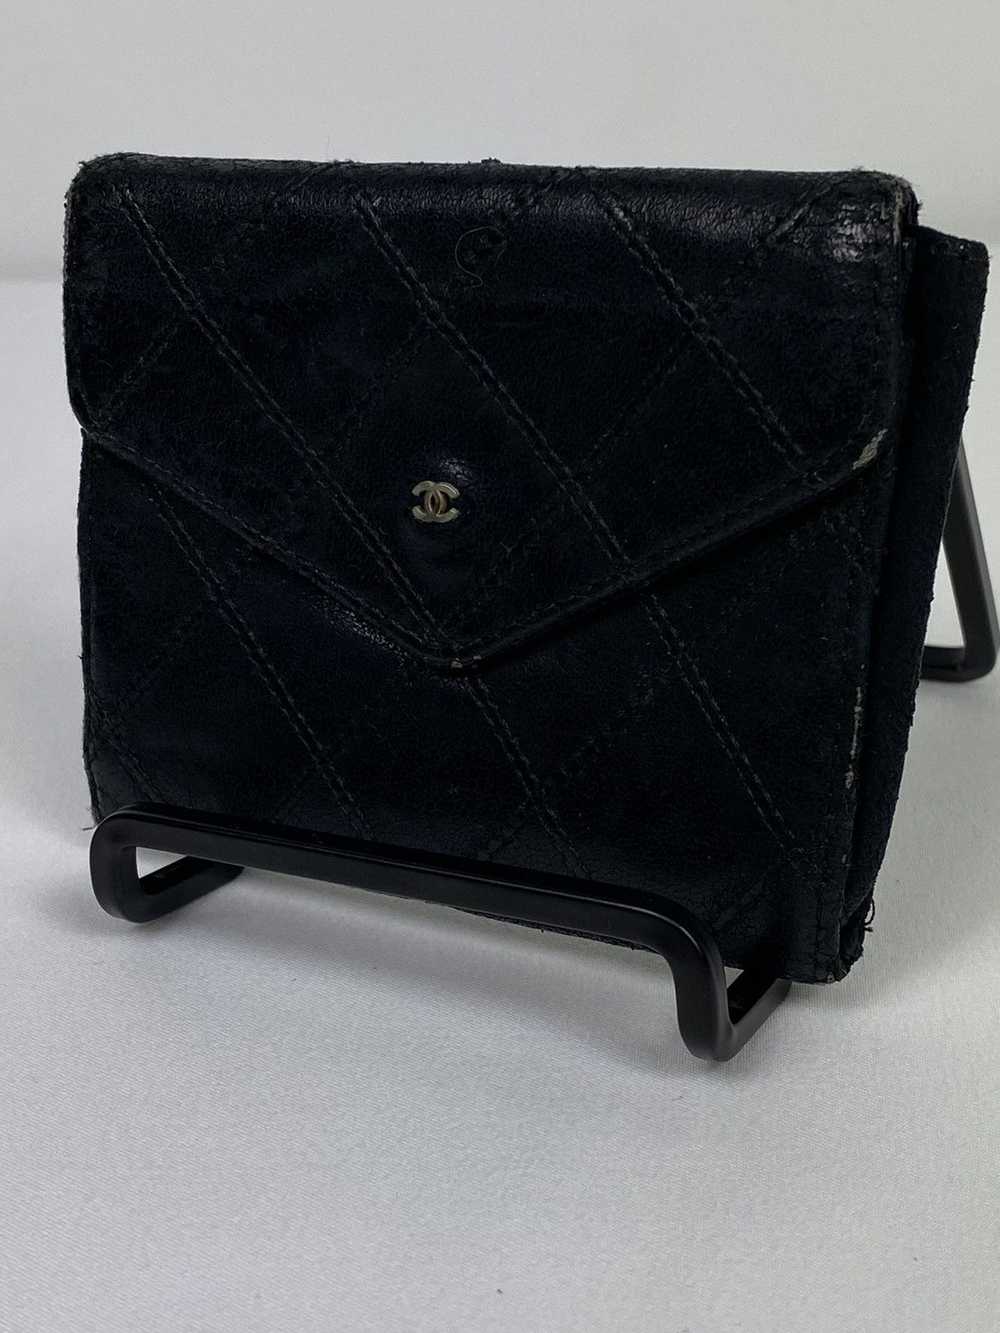 Chanel Chanel CC Quilted coin purse - image 3